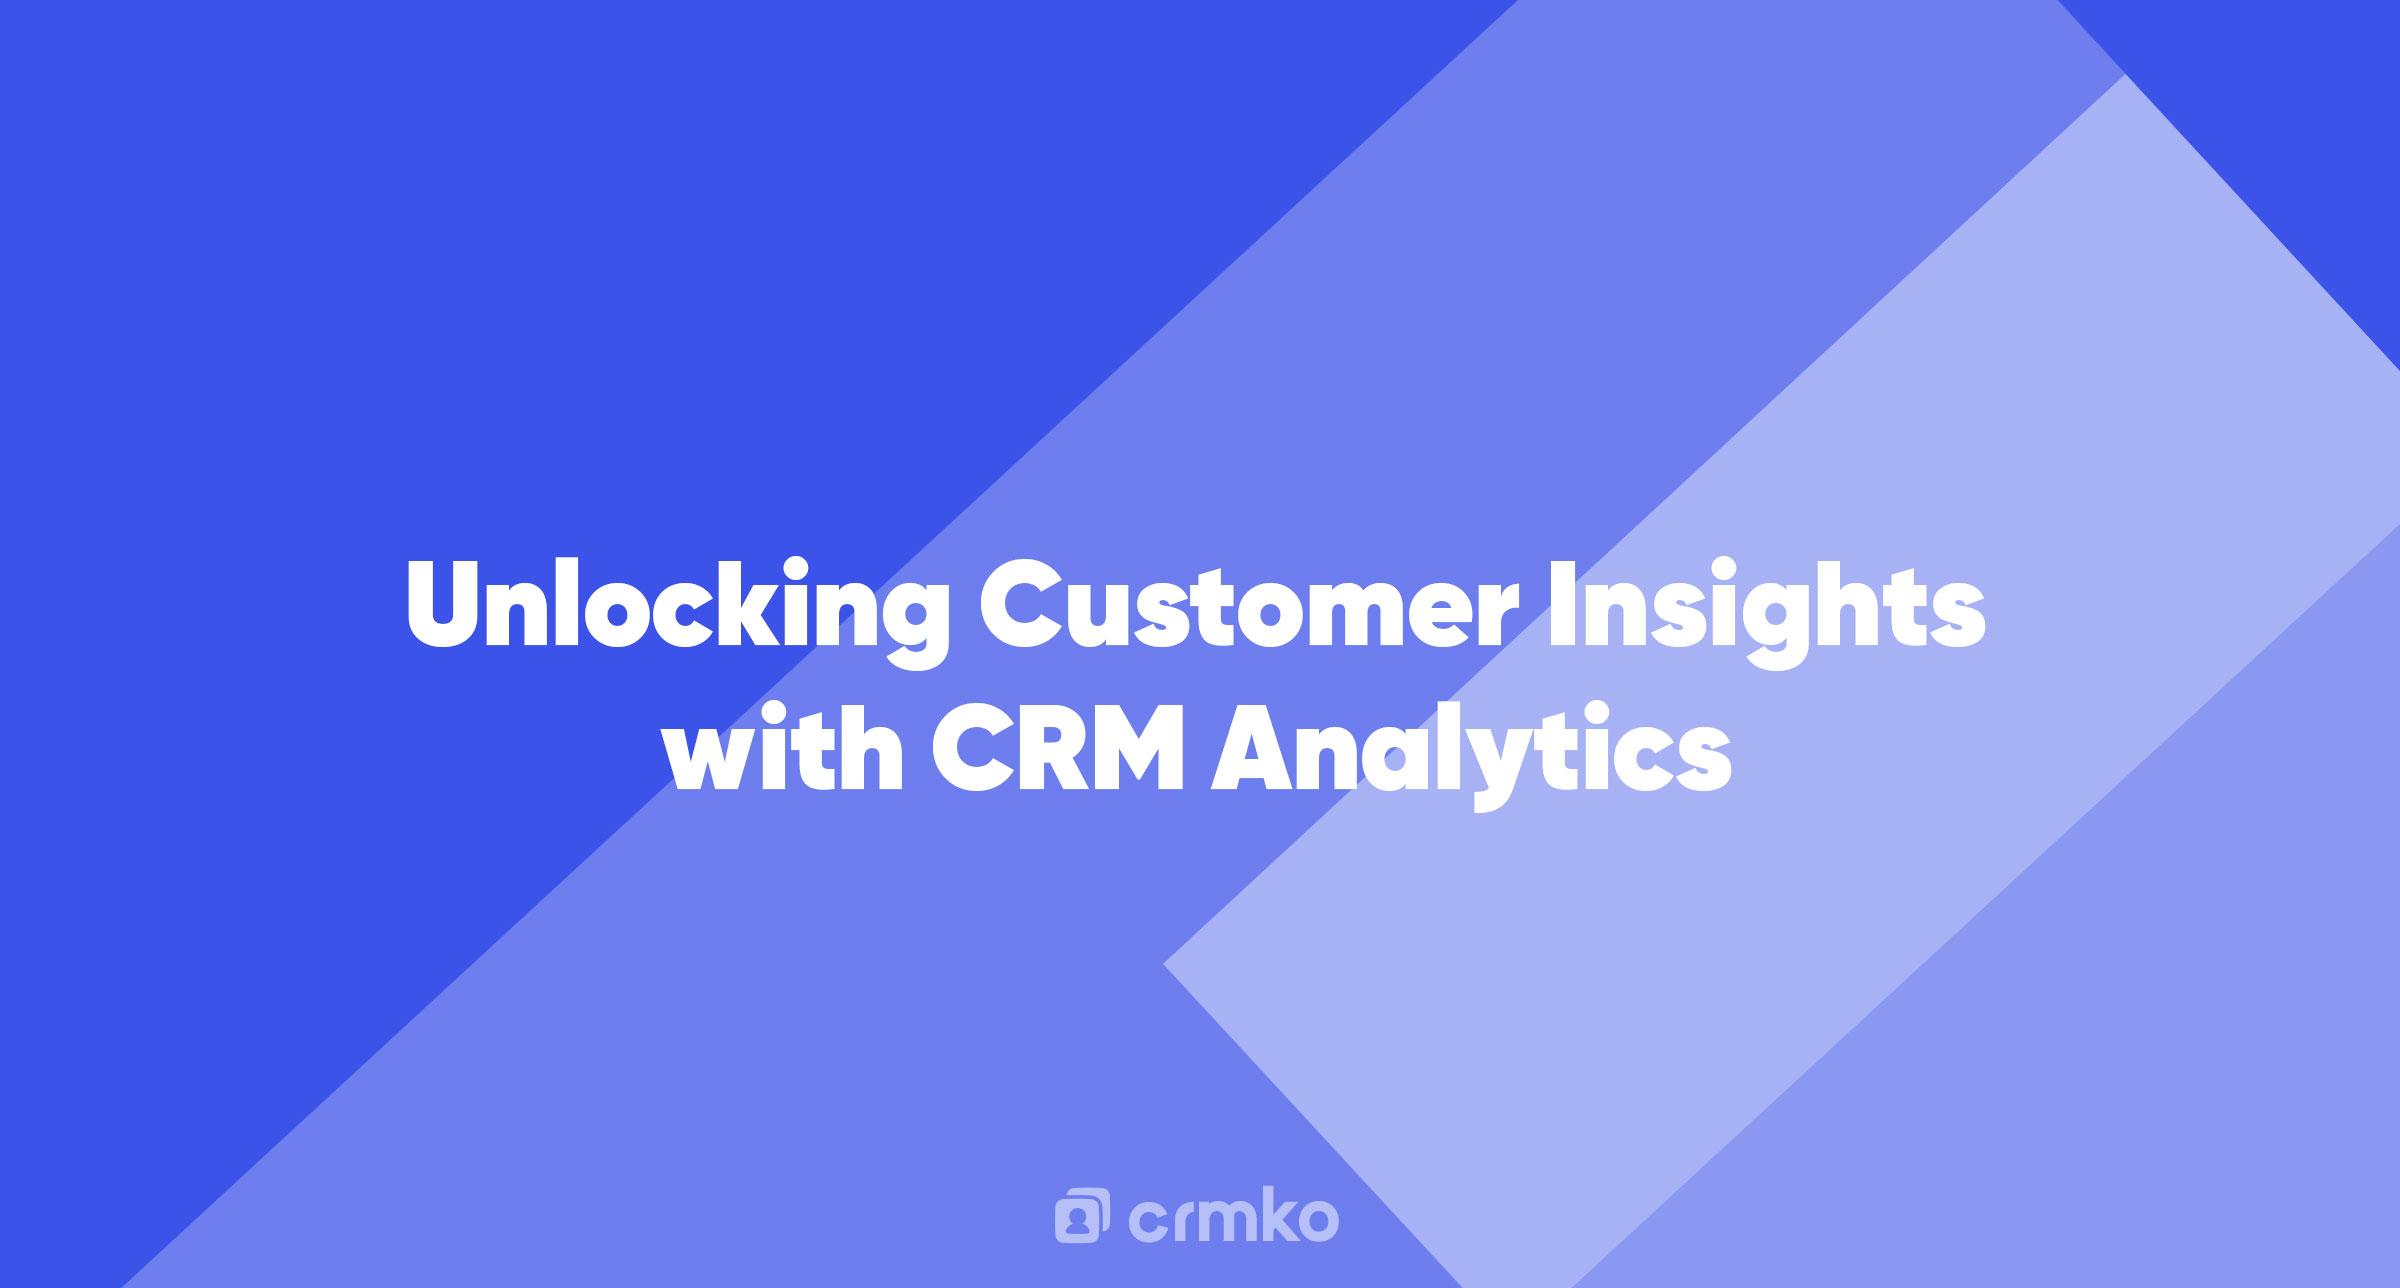 Article | Unlocking Customer Insights with CRM Analytics